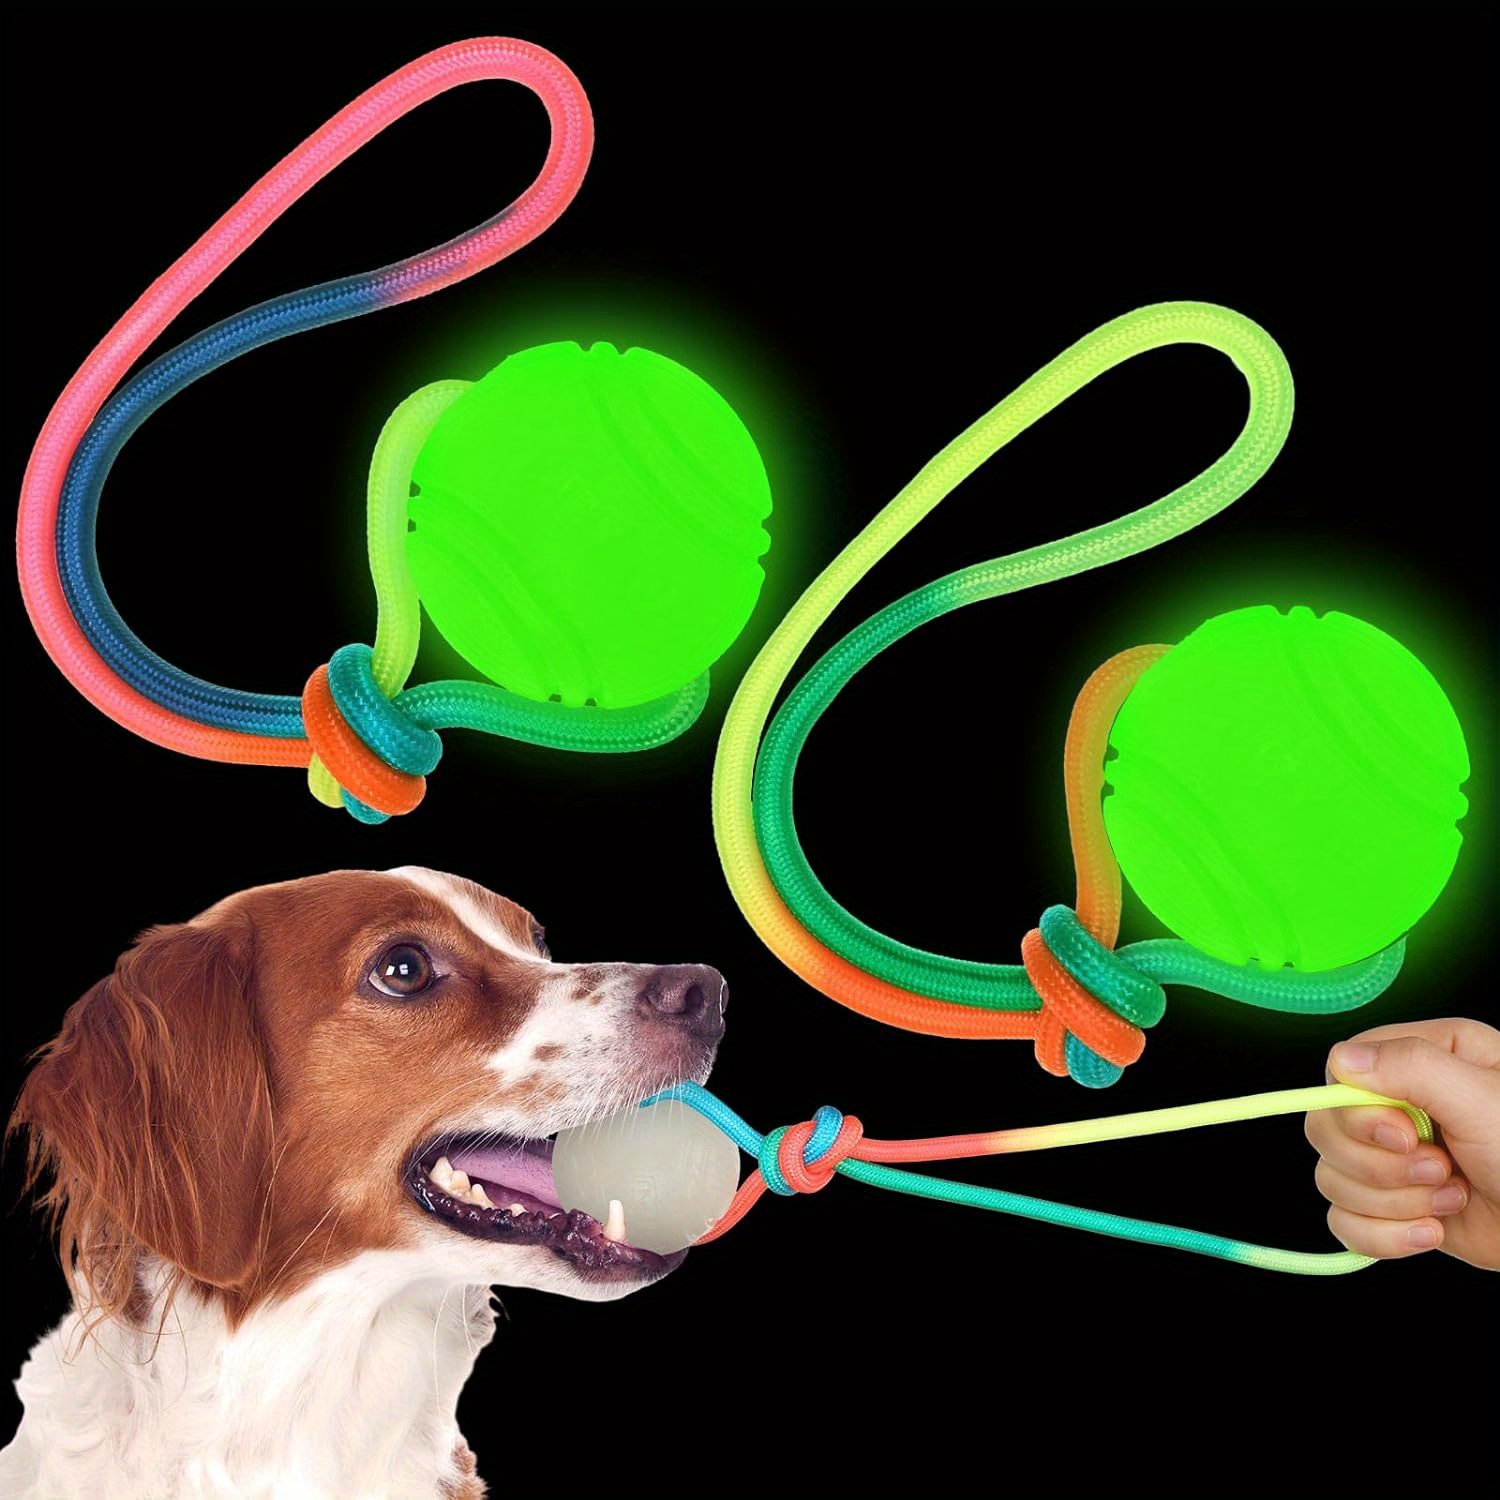 

1pc Luminous Dog Bouncy Ball Toy, Dog Molar Chewing Ball, Interactive Game Training Ball With Rope